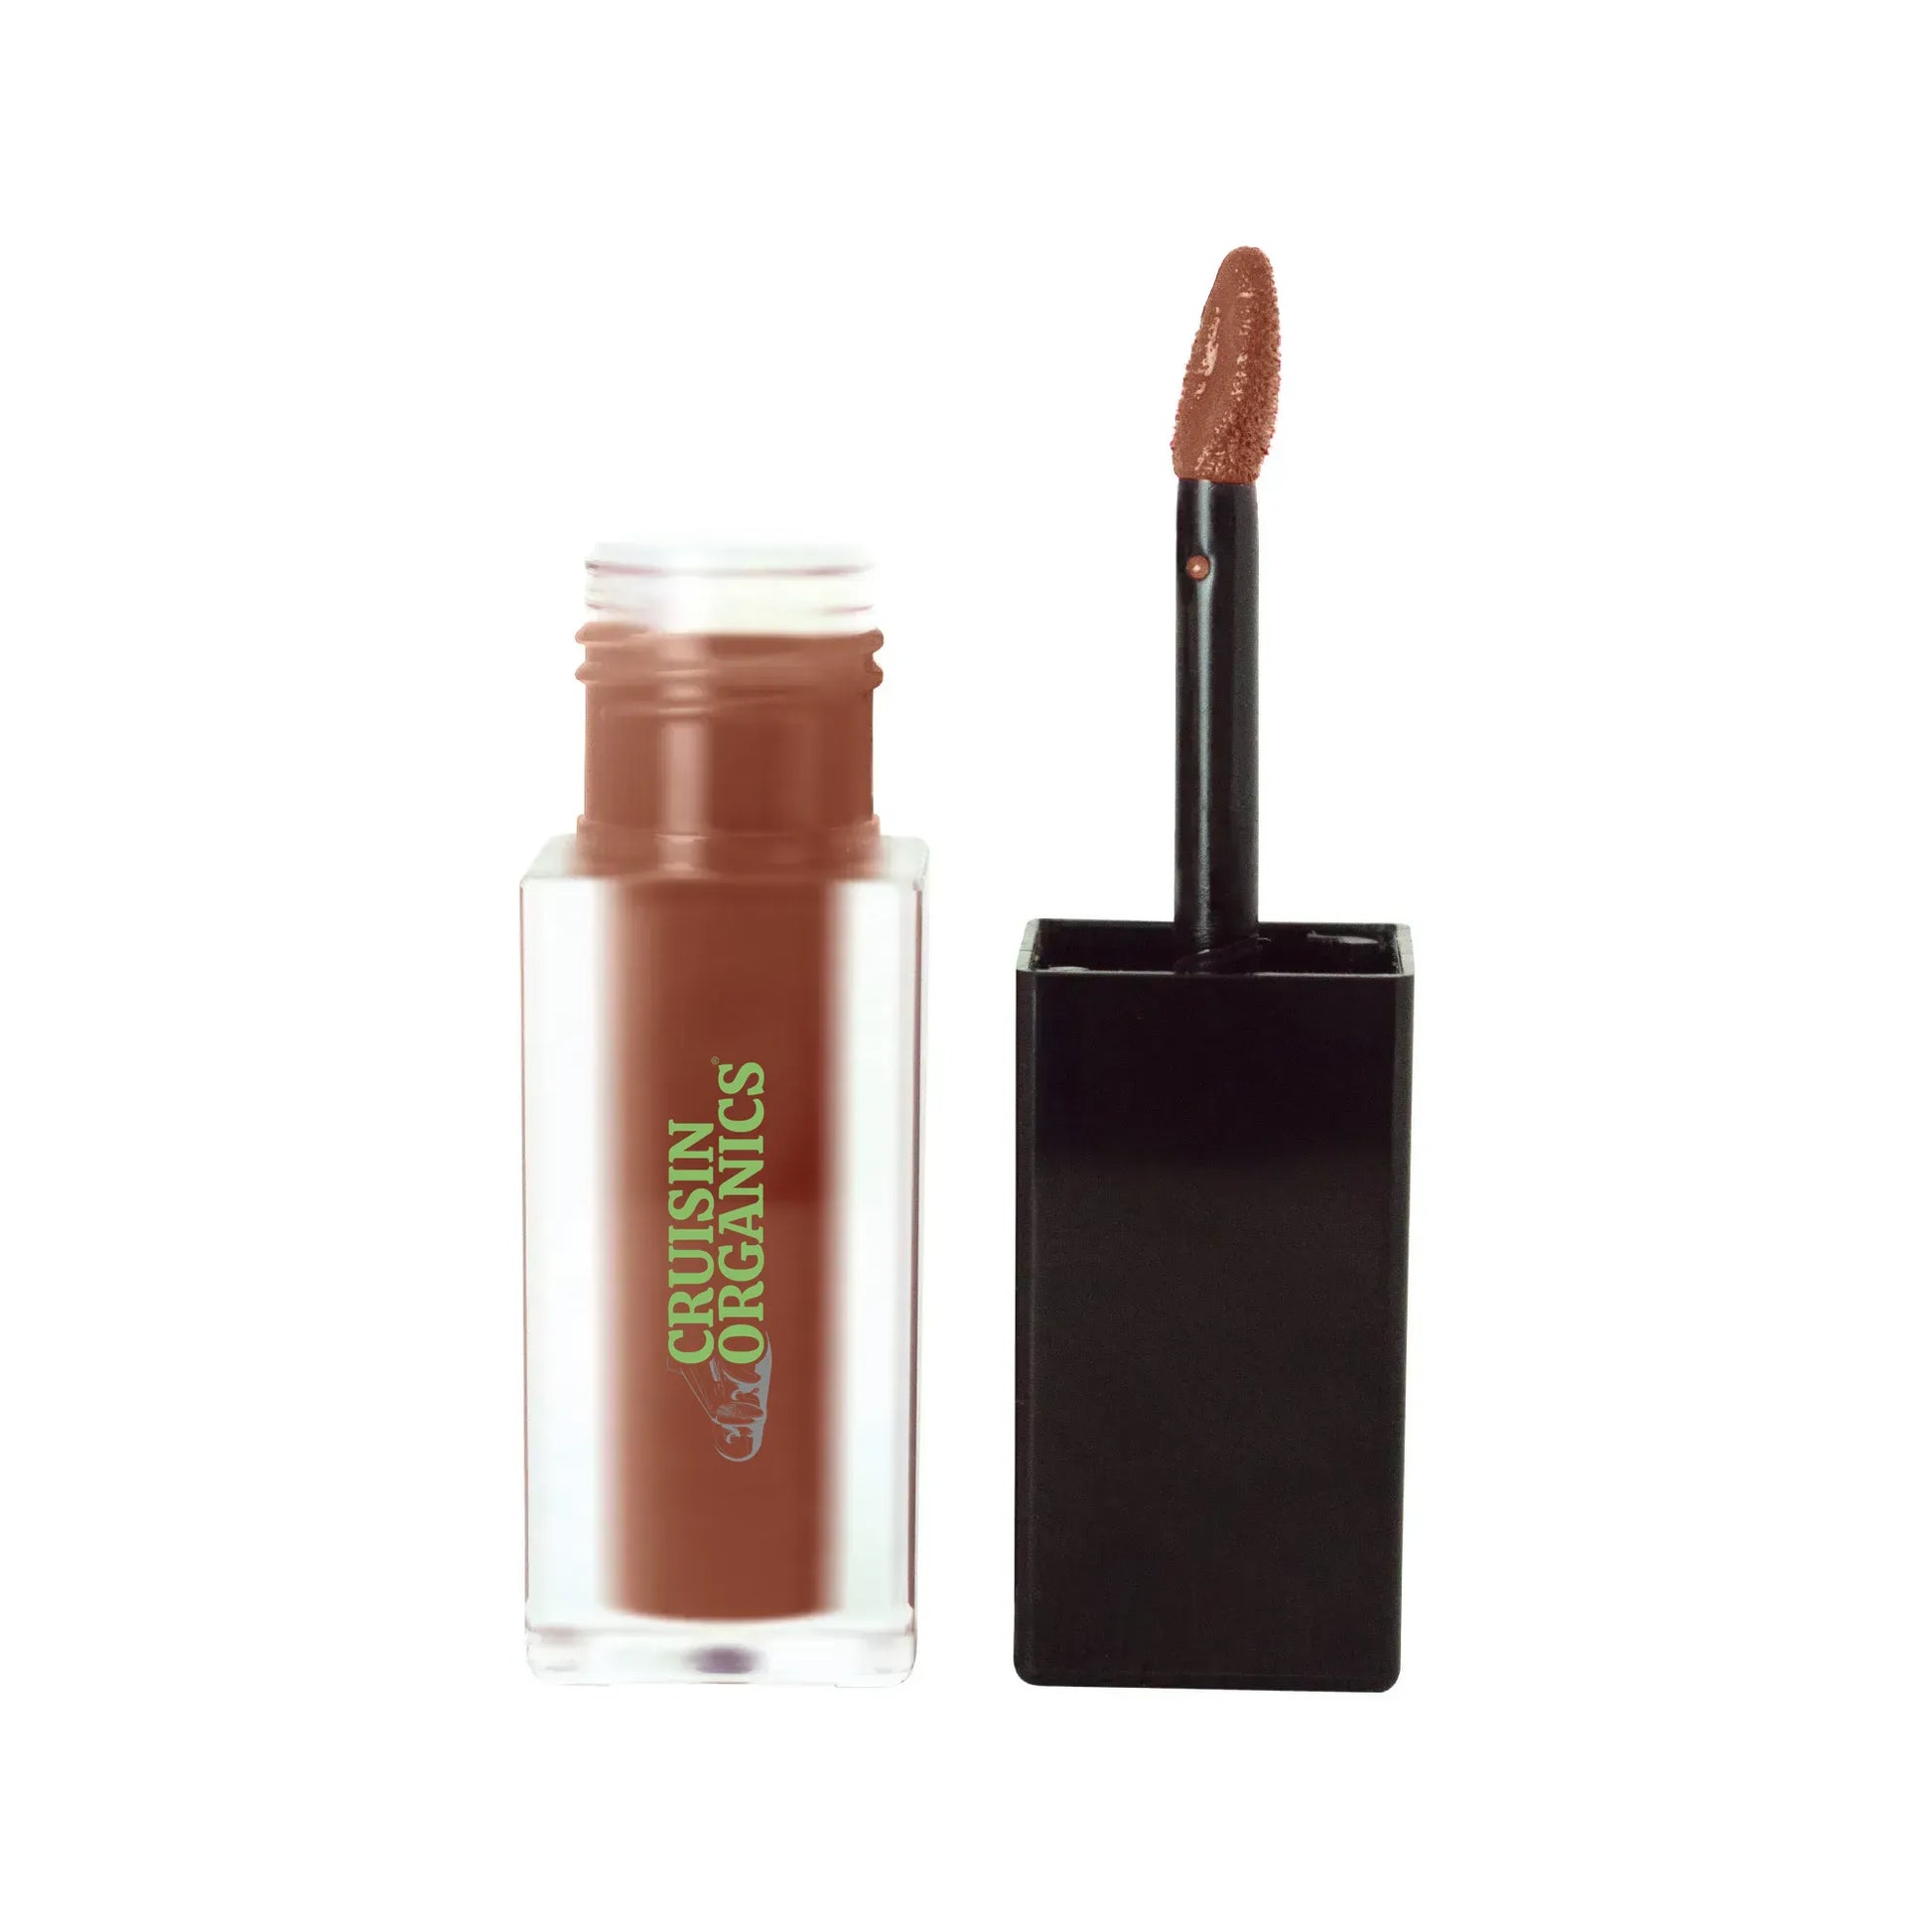 Get a bold and beautiful look with Cruisin Organics Cocoa Kiss matte lip stain. Achieve a velvety smooth finish while keeping your lips soft and vibrant all day long, thanks to the added vitamin E. No fuss, just a lasting, lip-impacting stain that will leave your lips feeling chocolatte kissable. Formulated for maximum impact and comfort